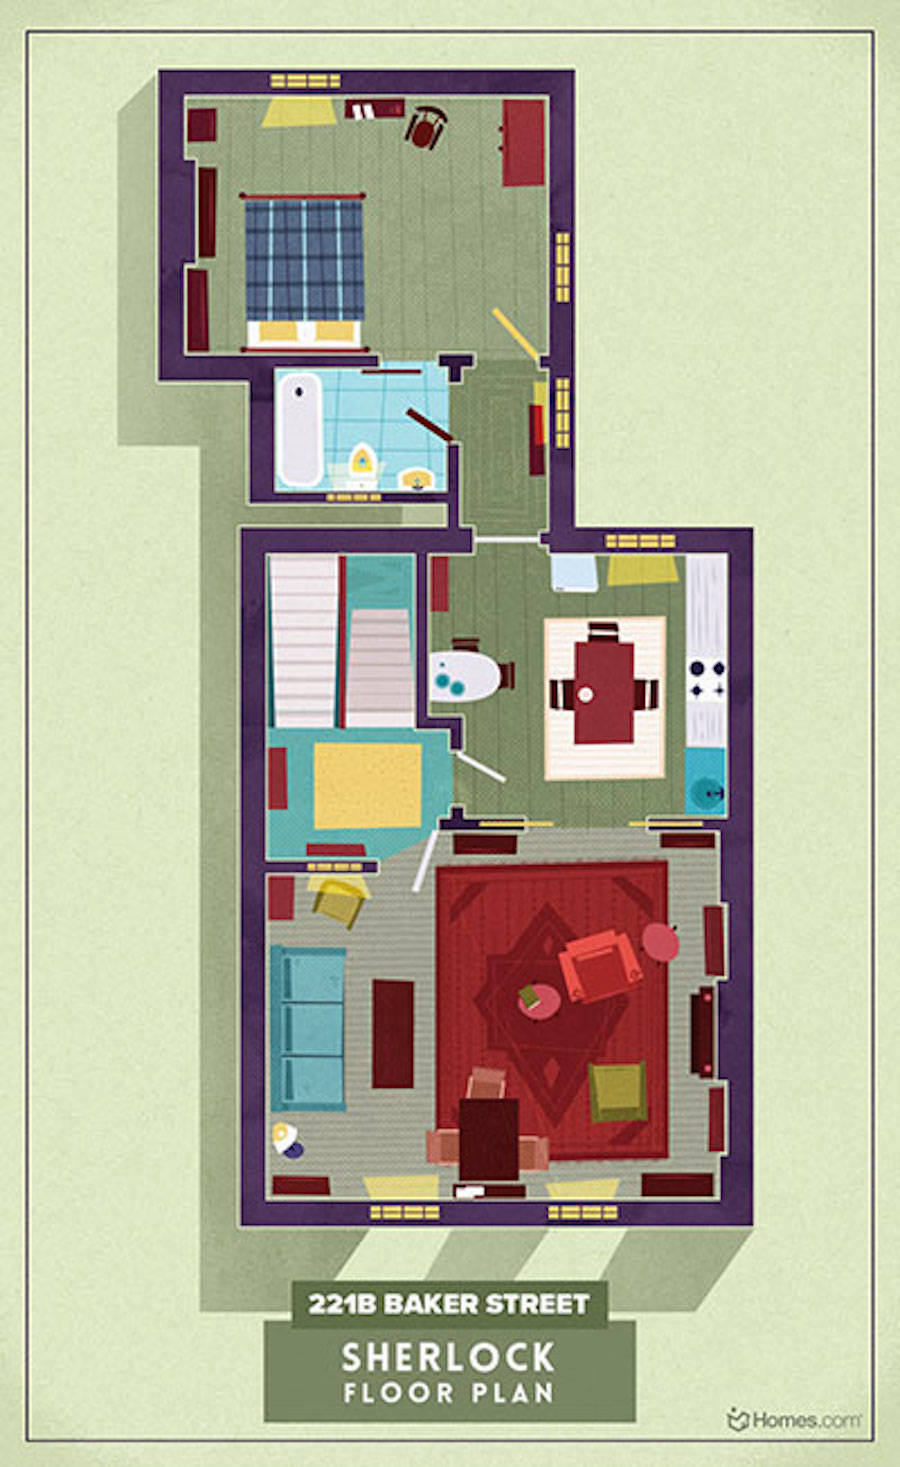 Home Floor Plans of Famous TV Shows Media